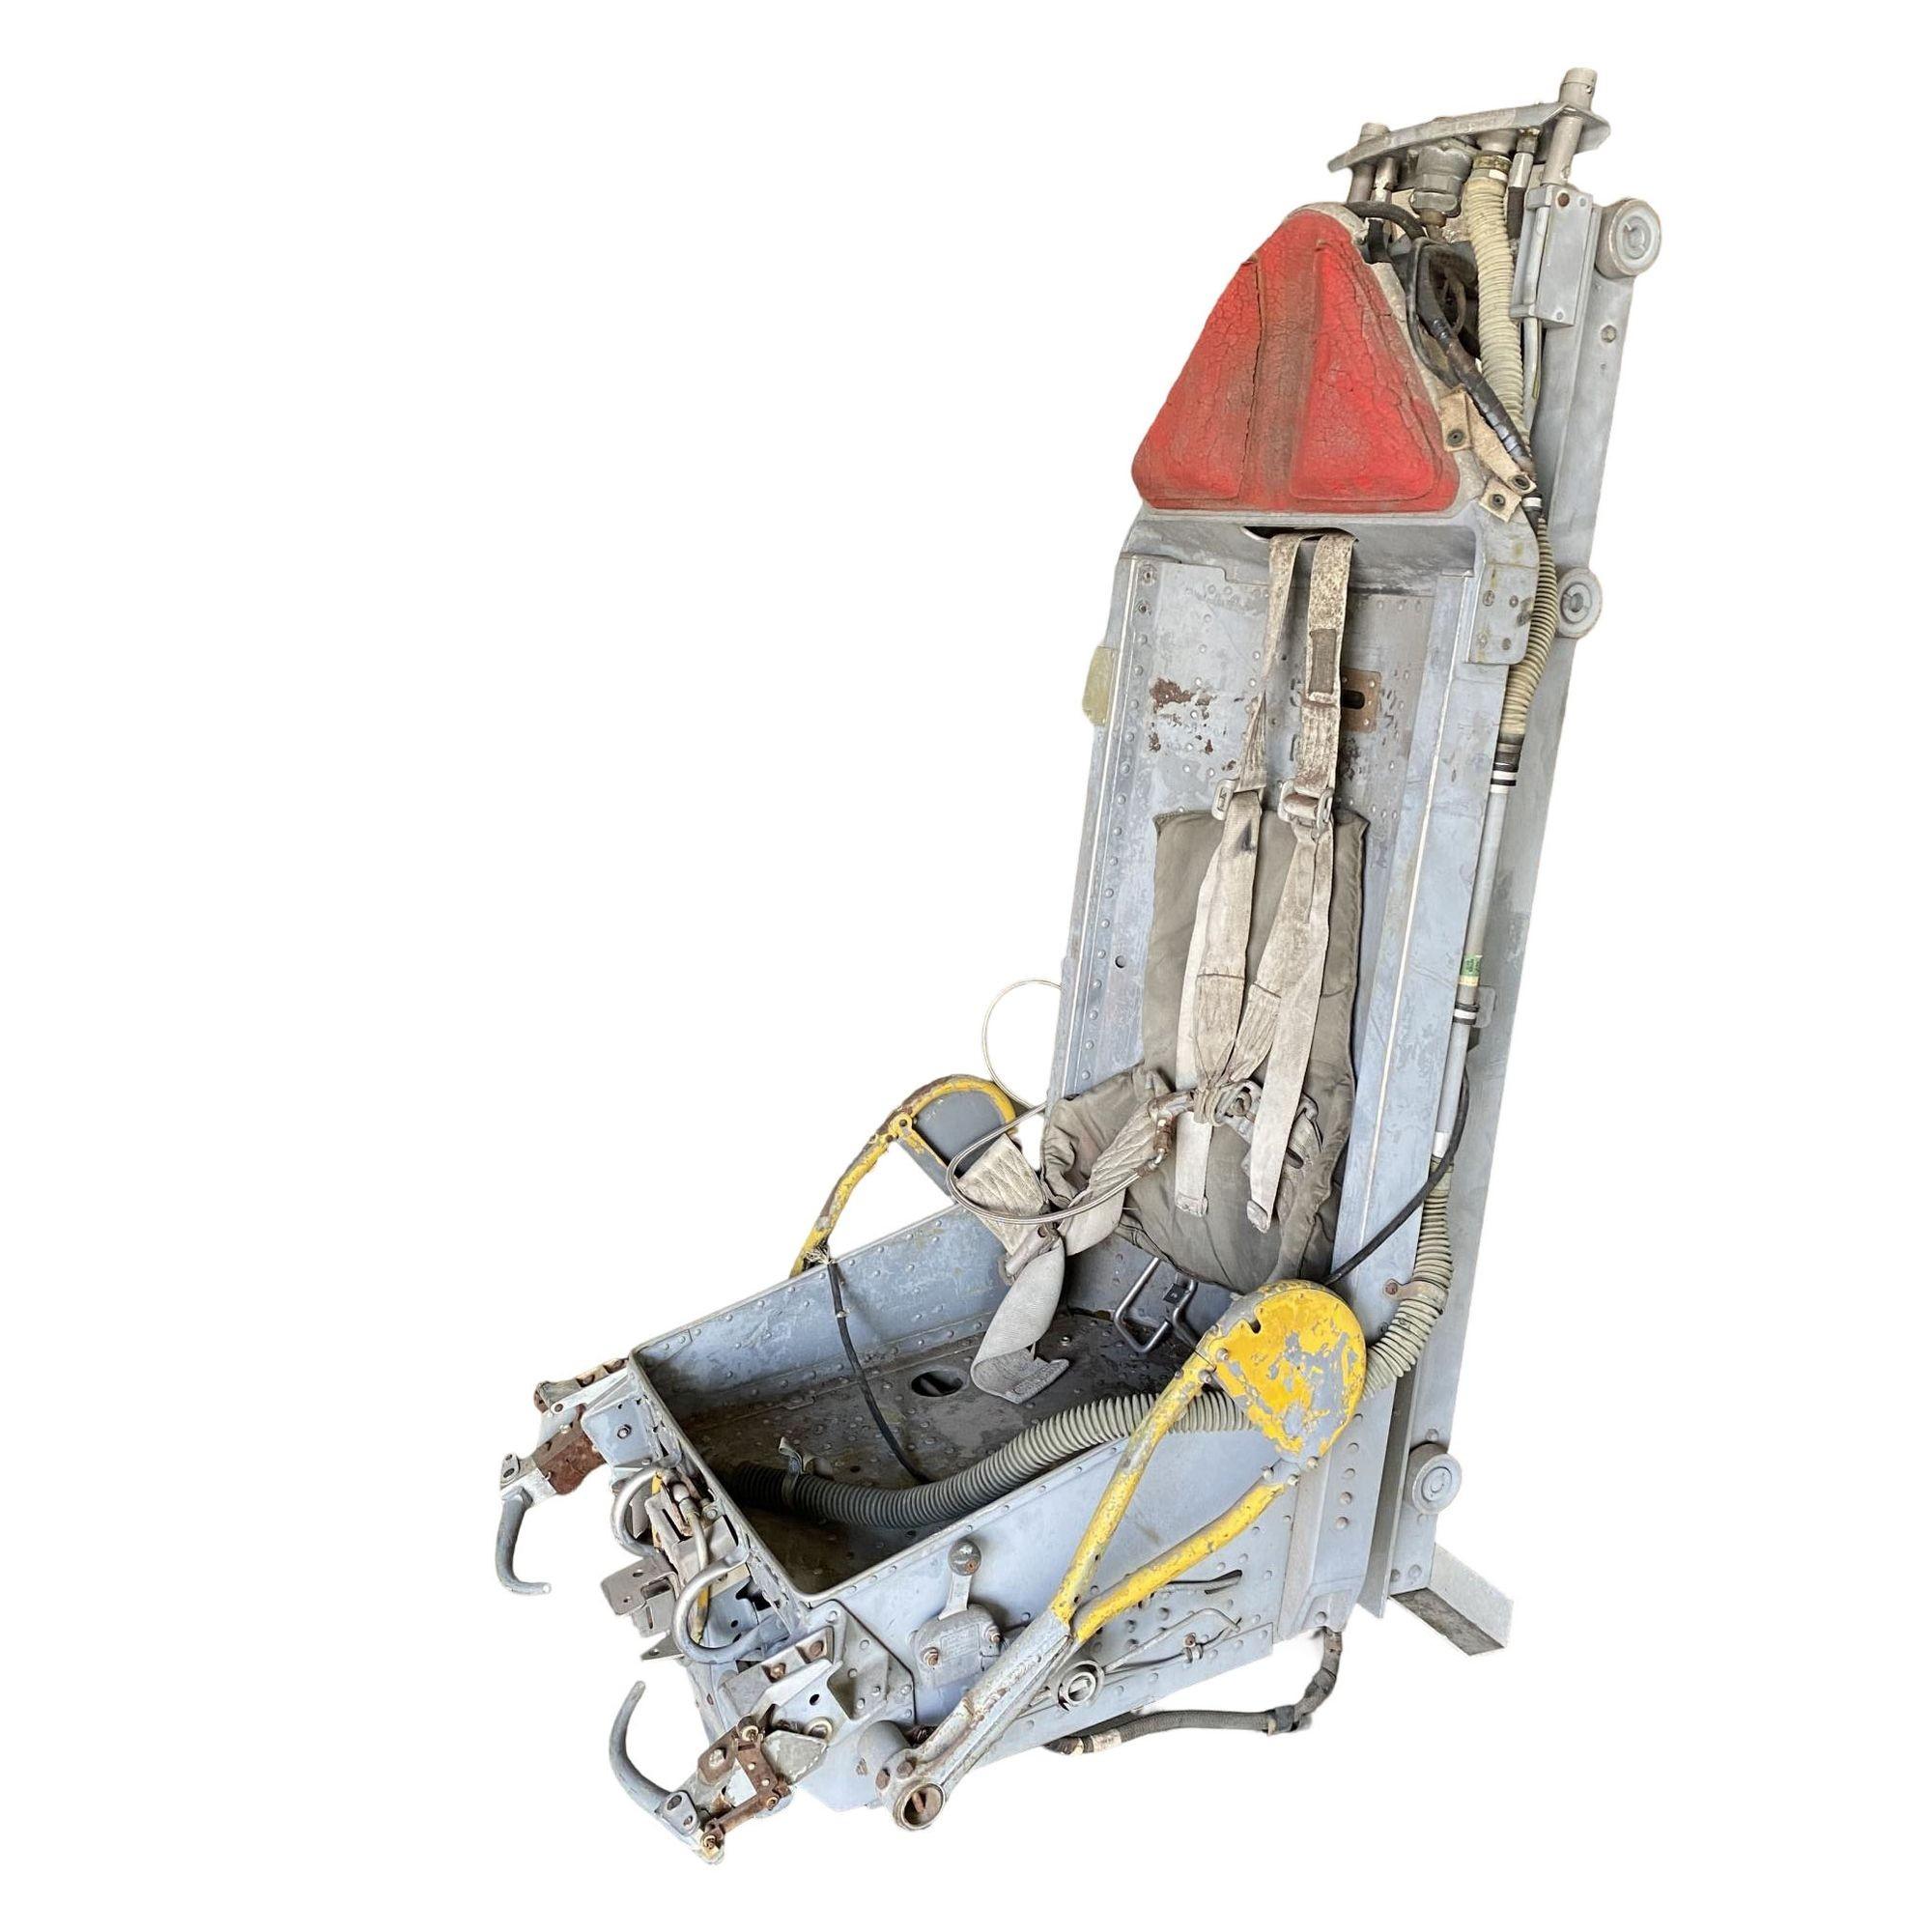 b-52 ejection seat